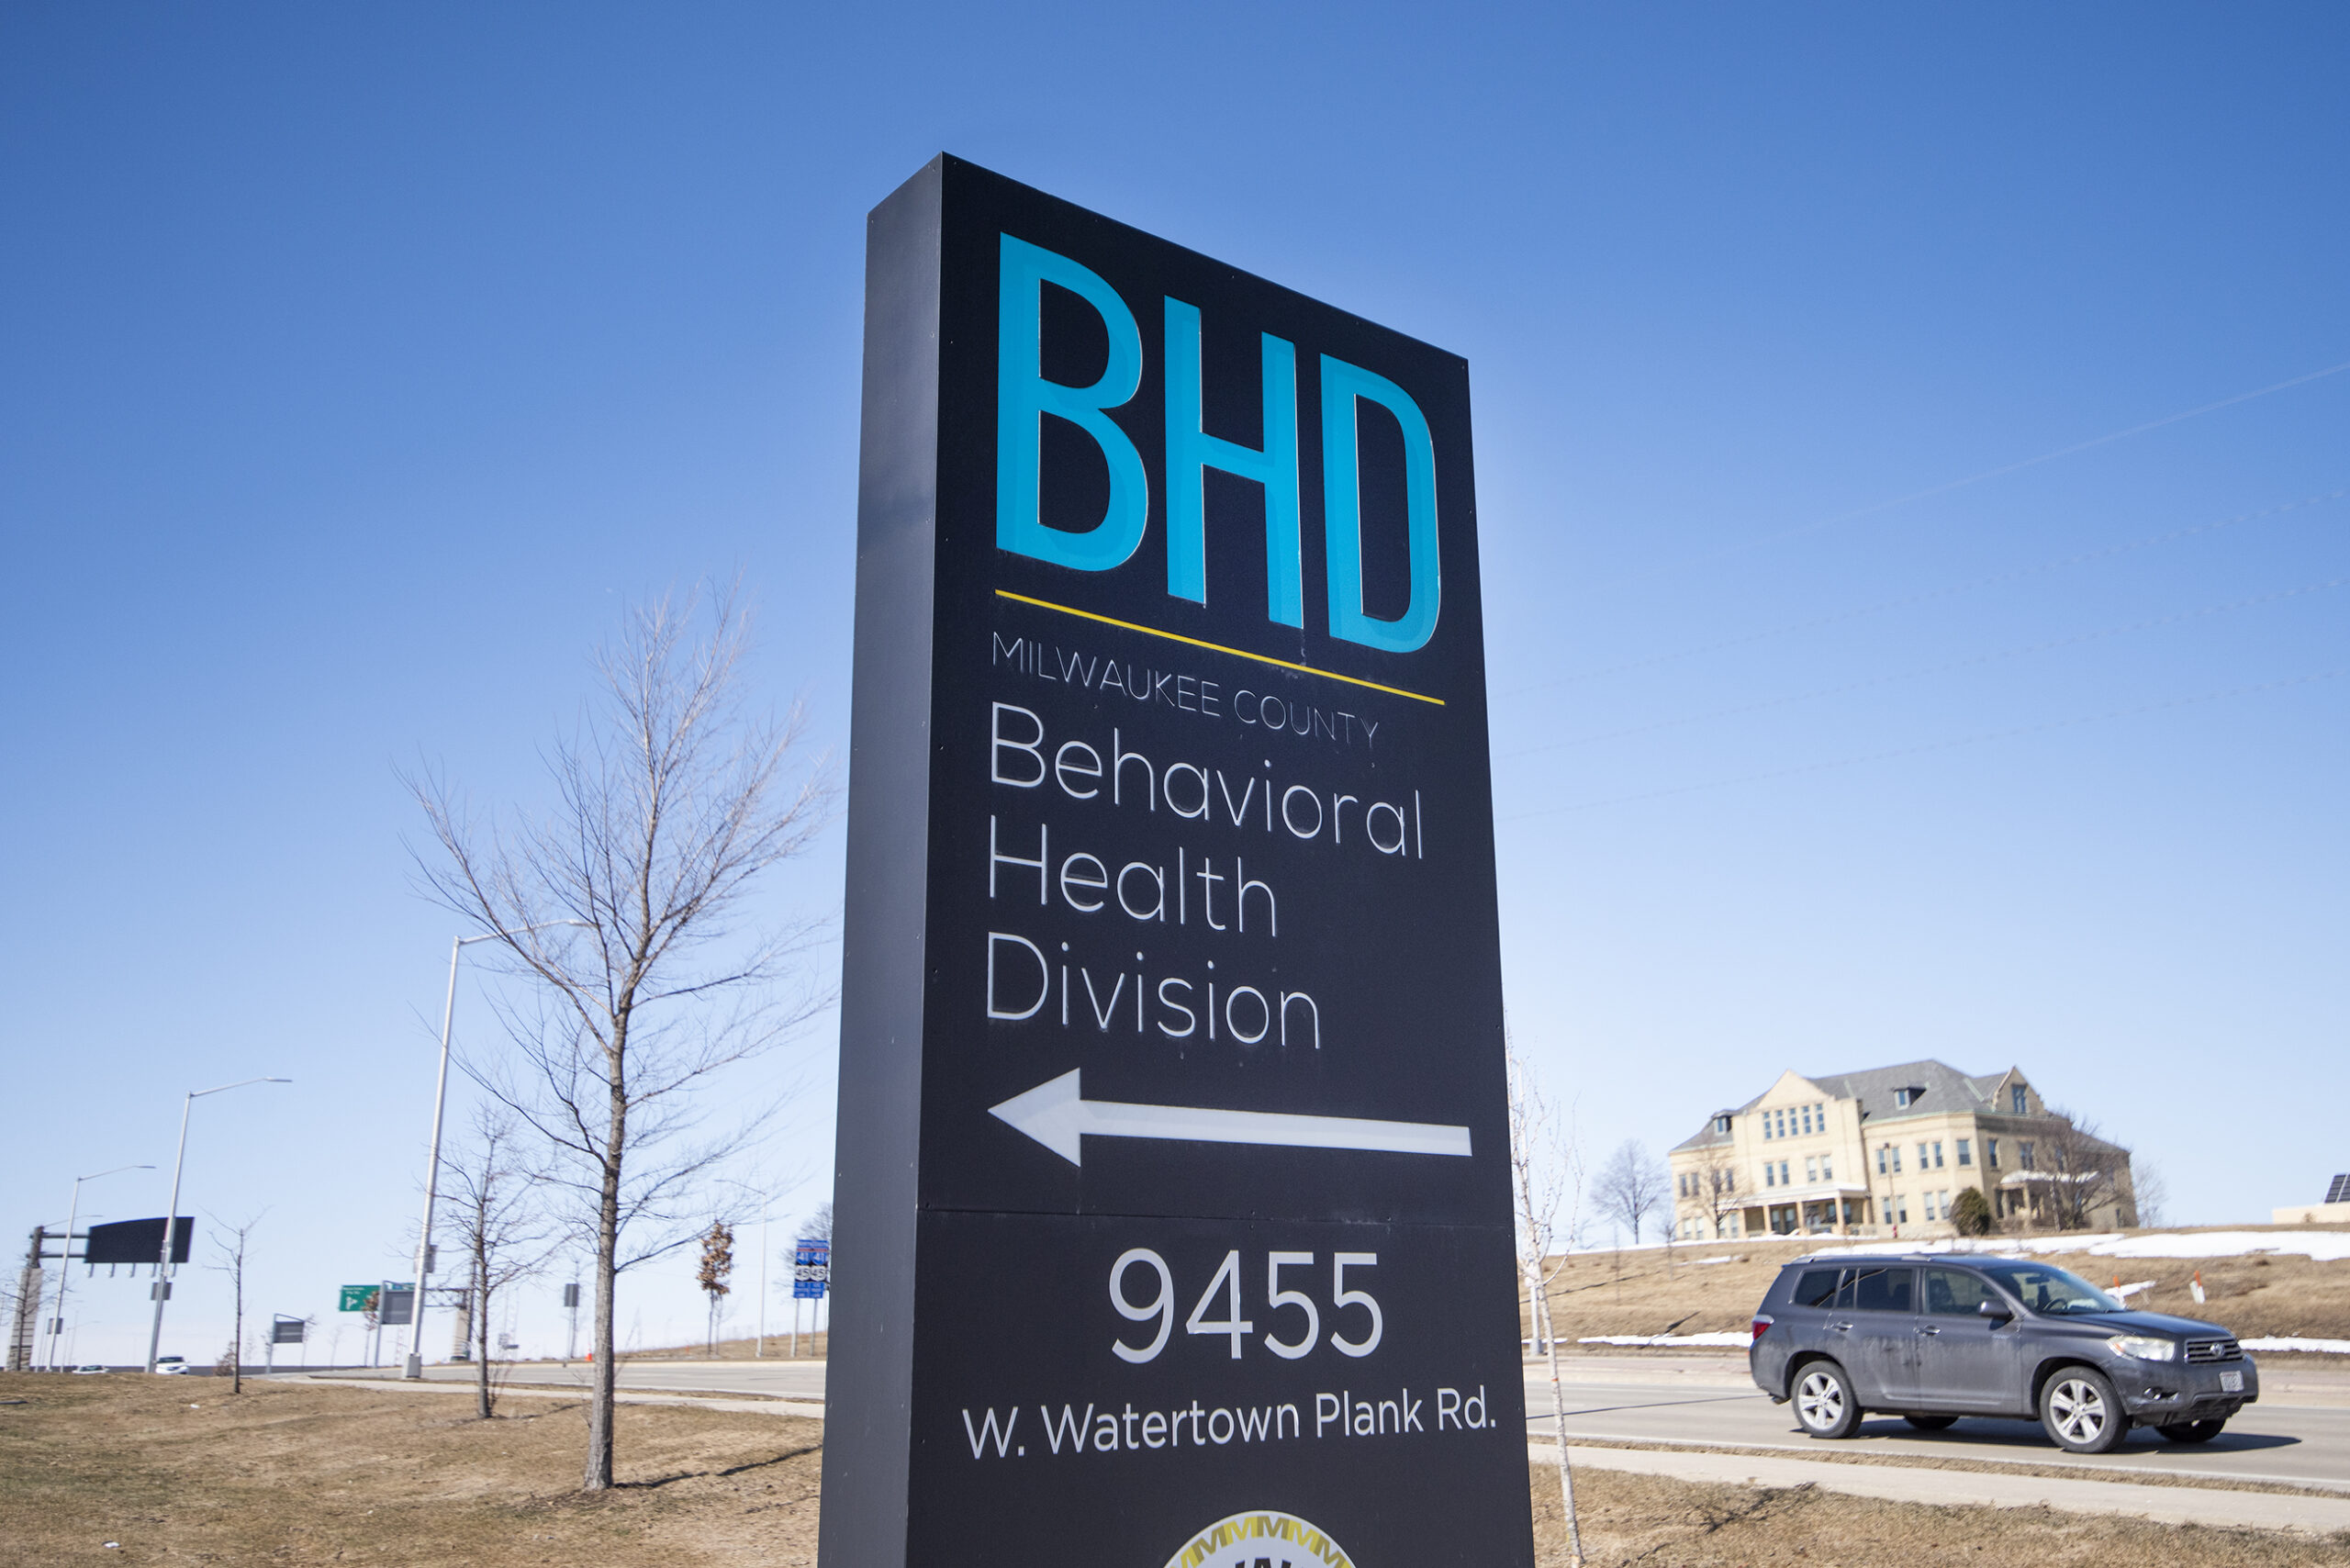 "BHD" in blue text are written on a sign backdropped by a blue sky.